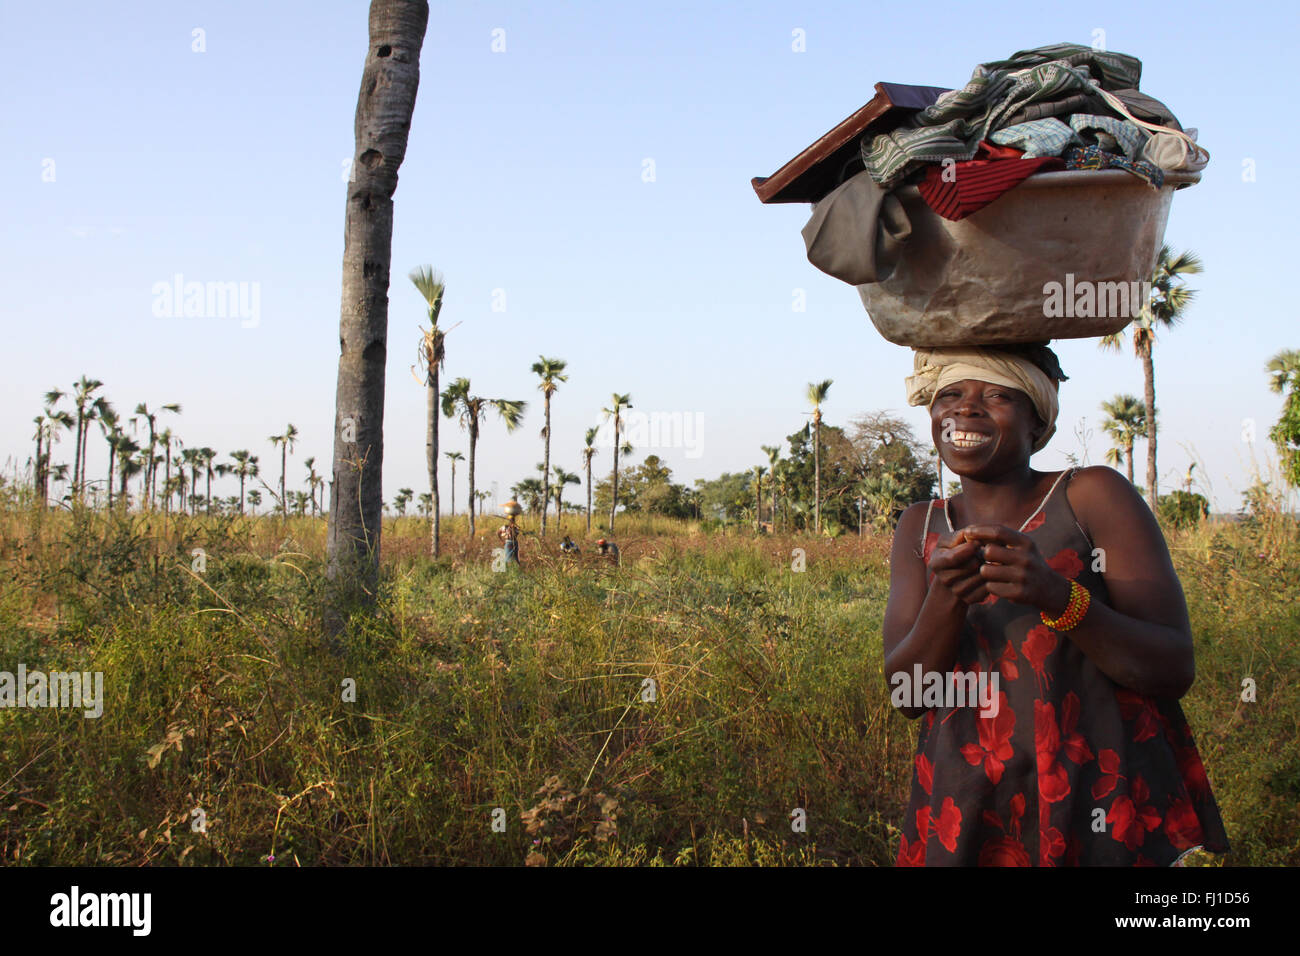 Woman carrying basket on her head and going to work in the fields and forest early in the morning near Banfora in Burkina Faso Stock Photo